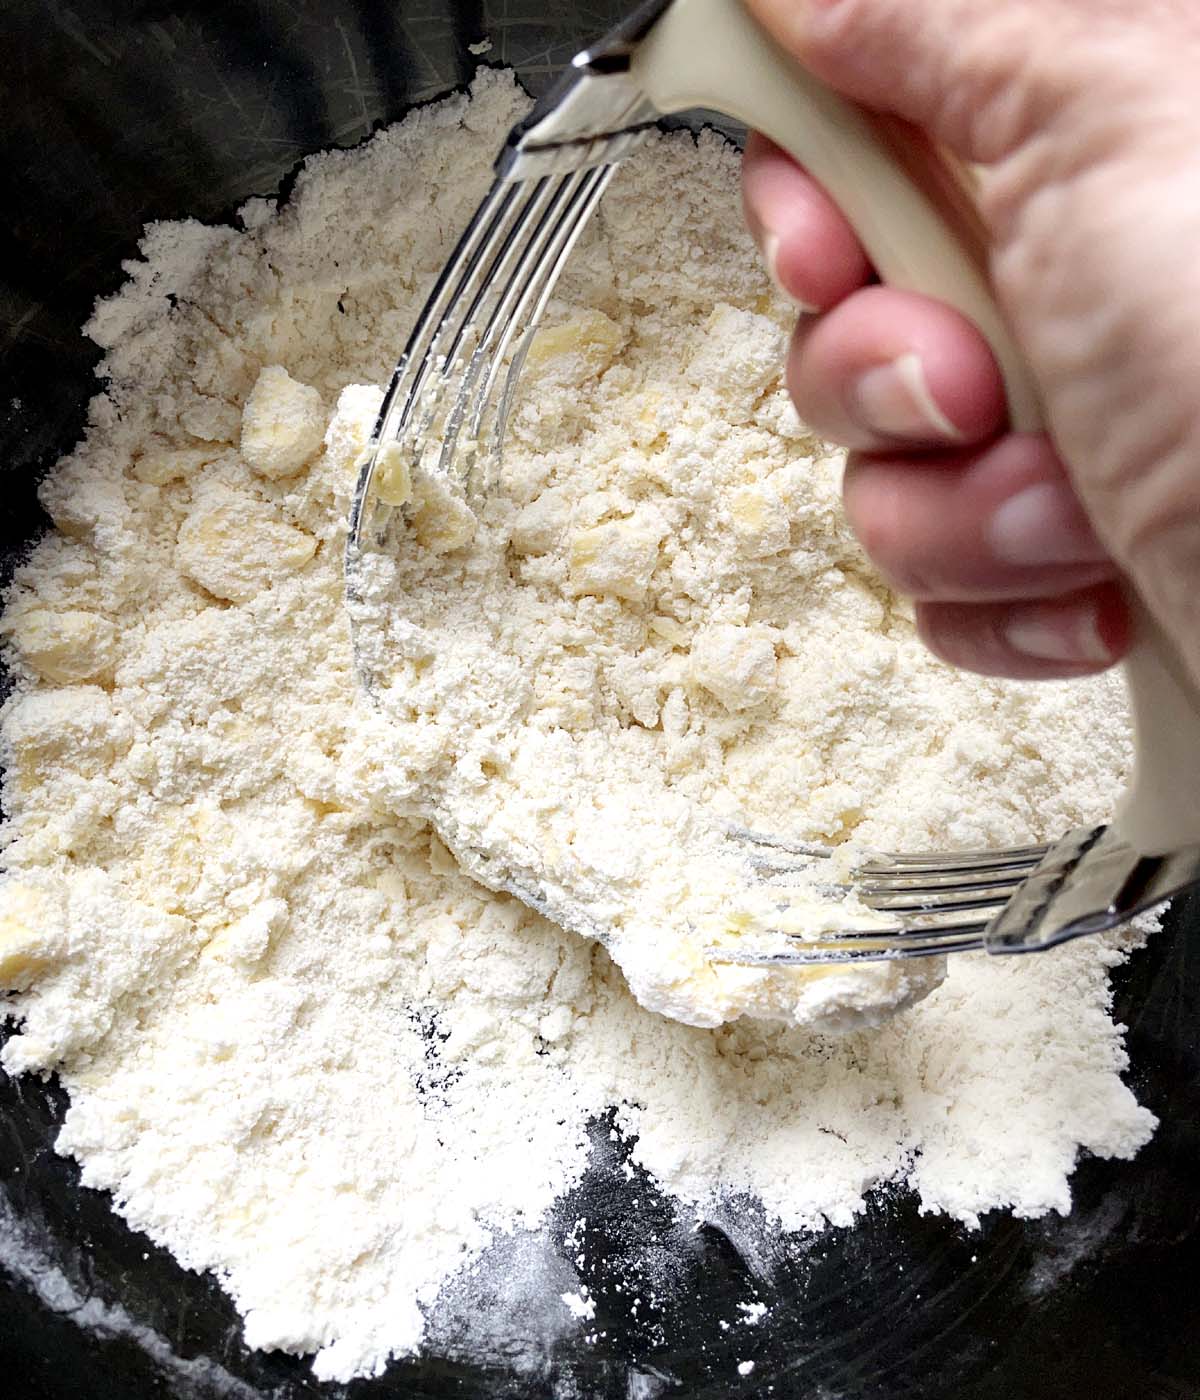 A hand holding a metal pastry blender cutting into butter and flour in a black bowl.